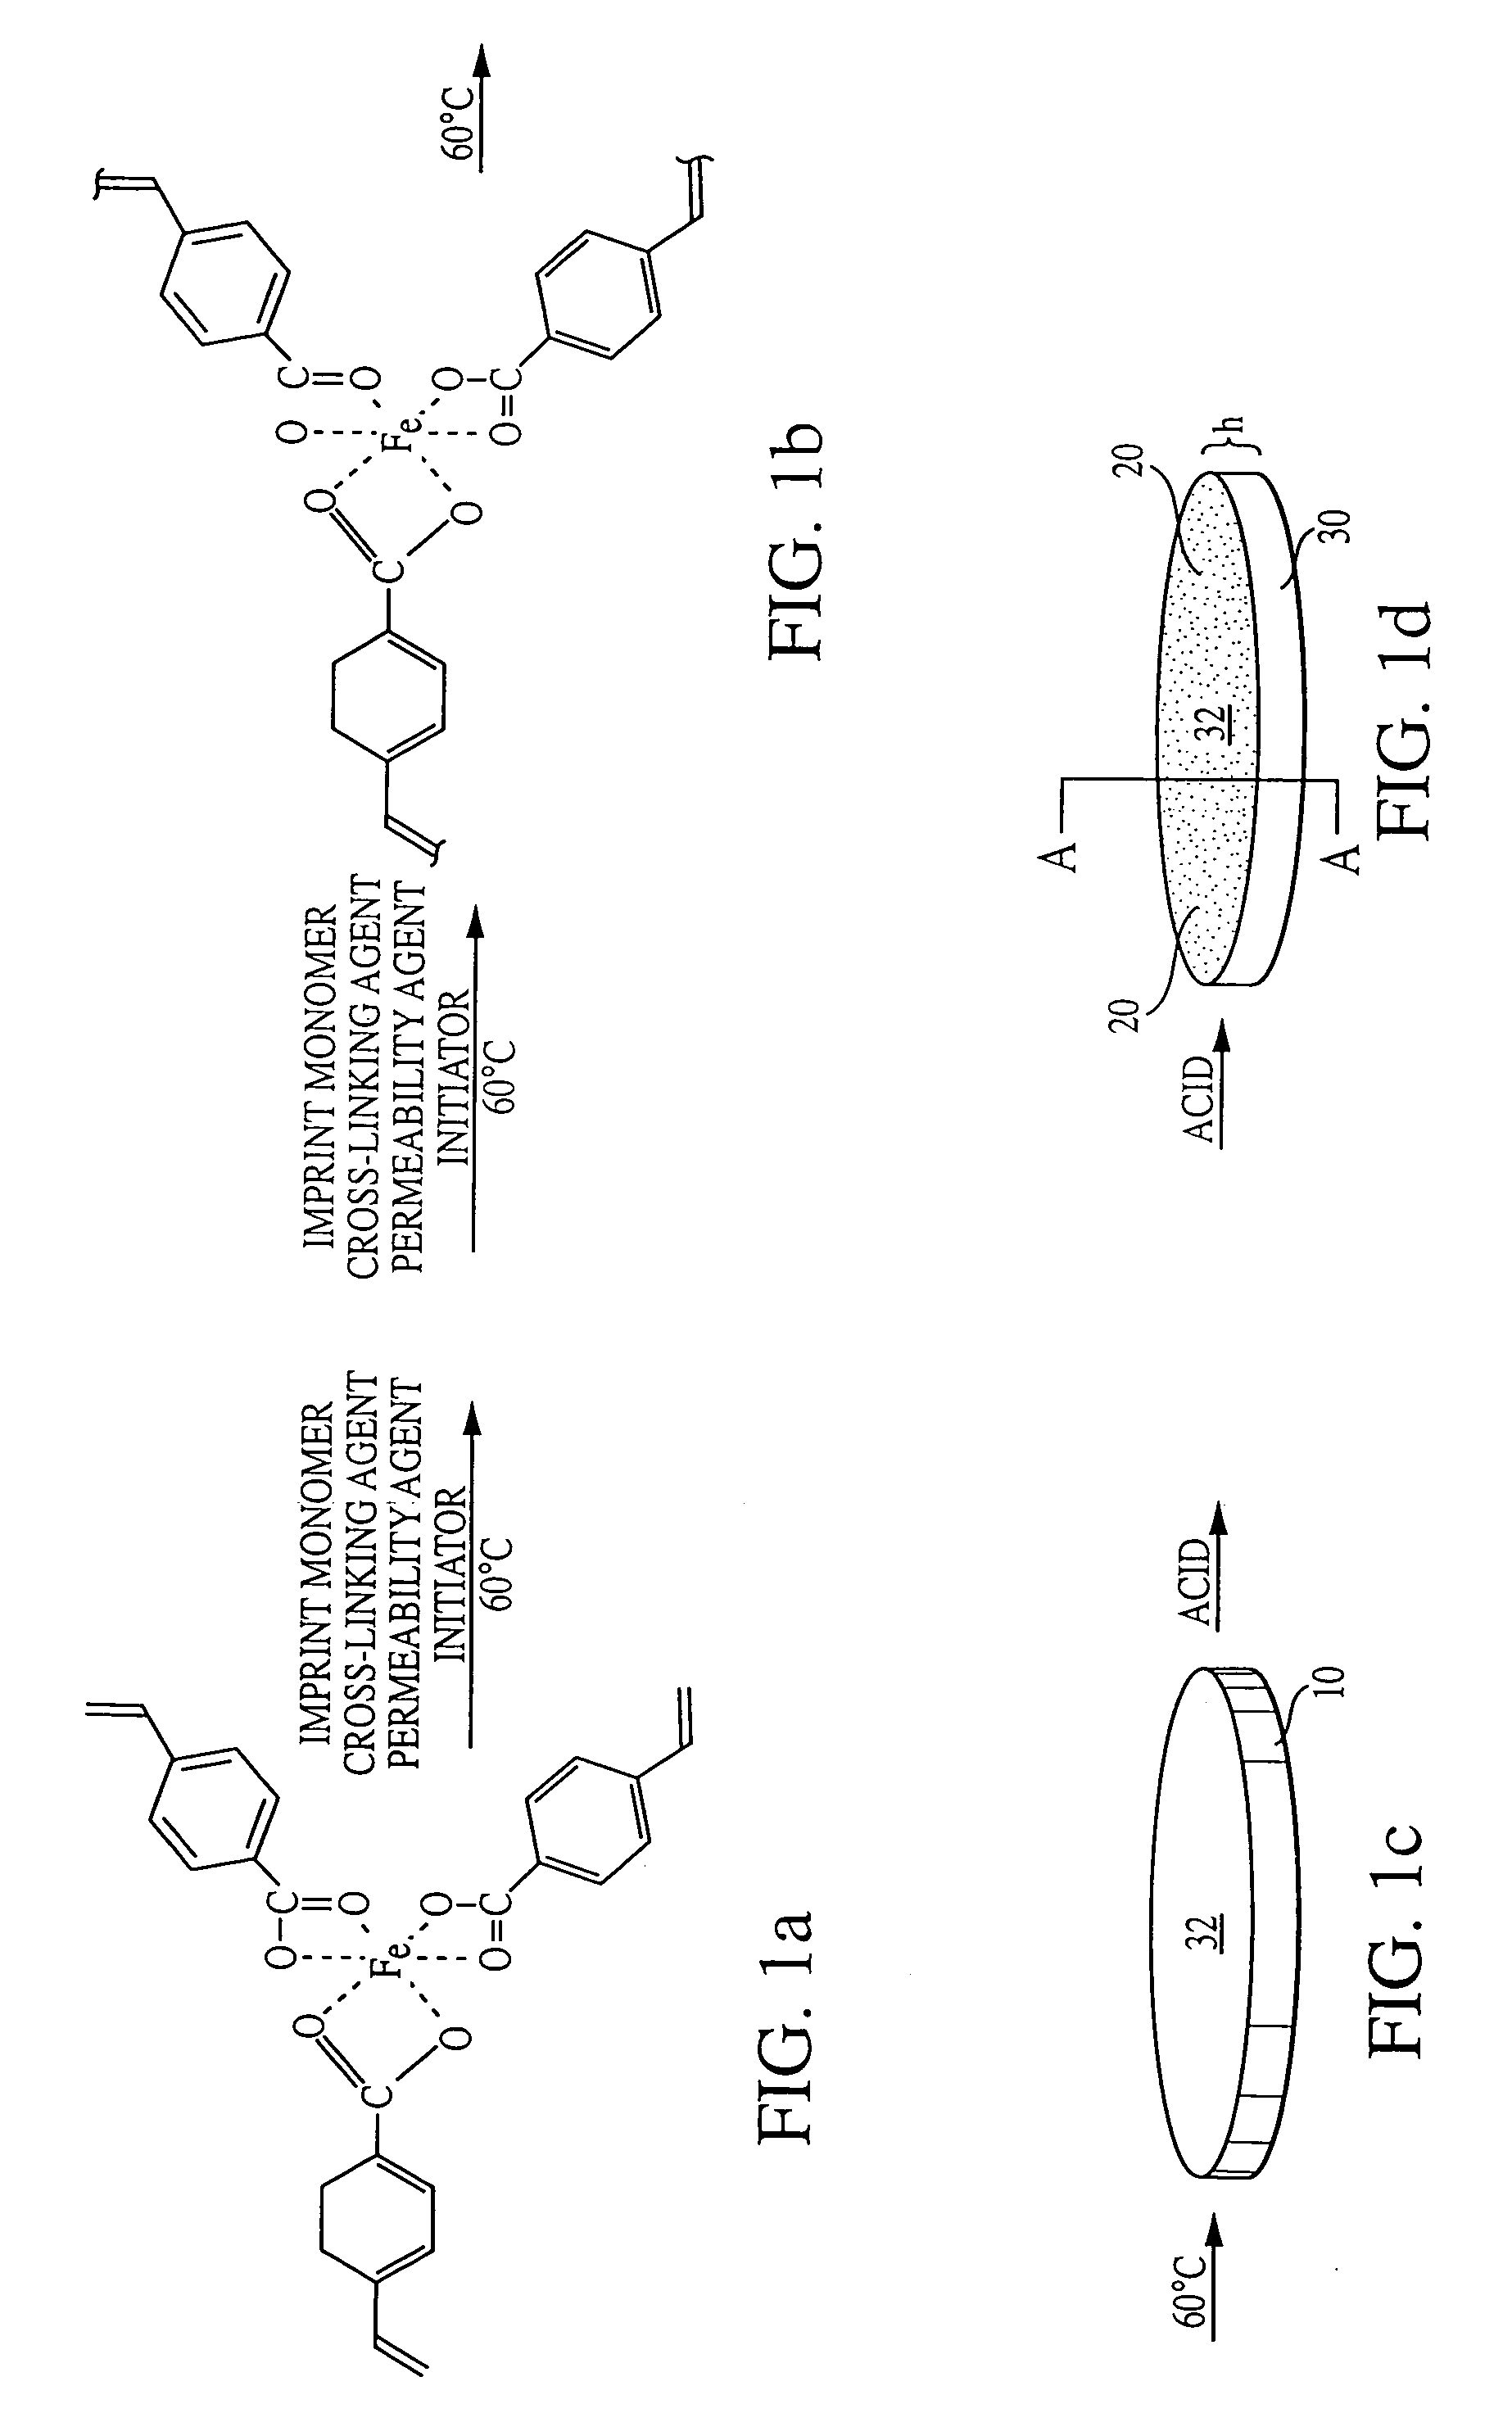 Polymer based permeable membrane for removal of ions